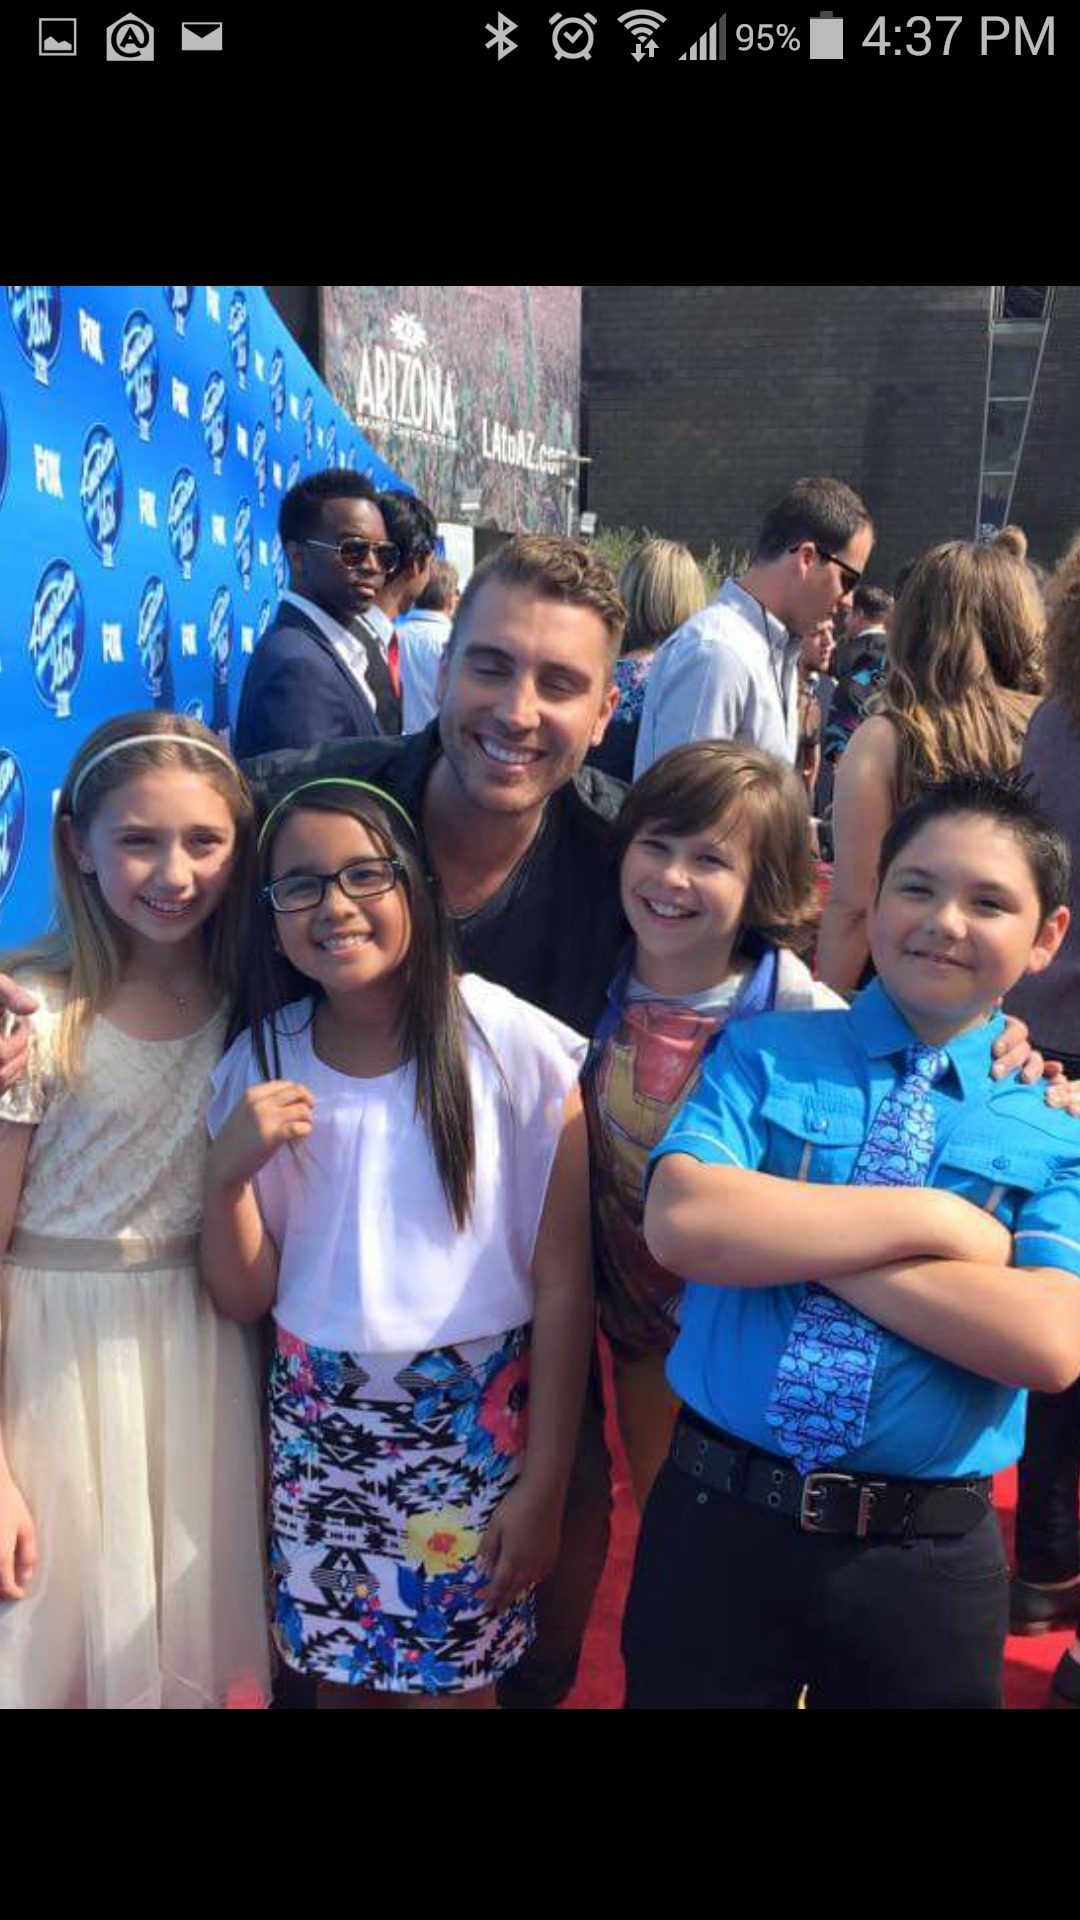 Mason with the WINNER! On the red carpet for American Idol Finale